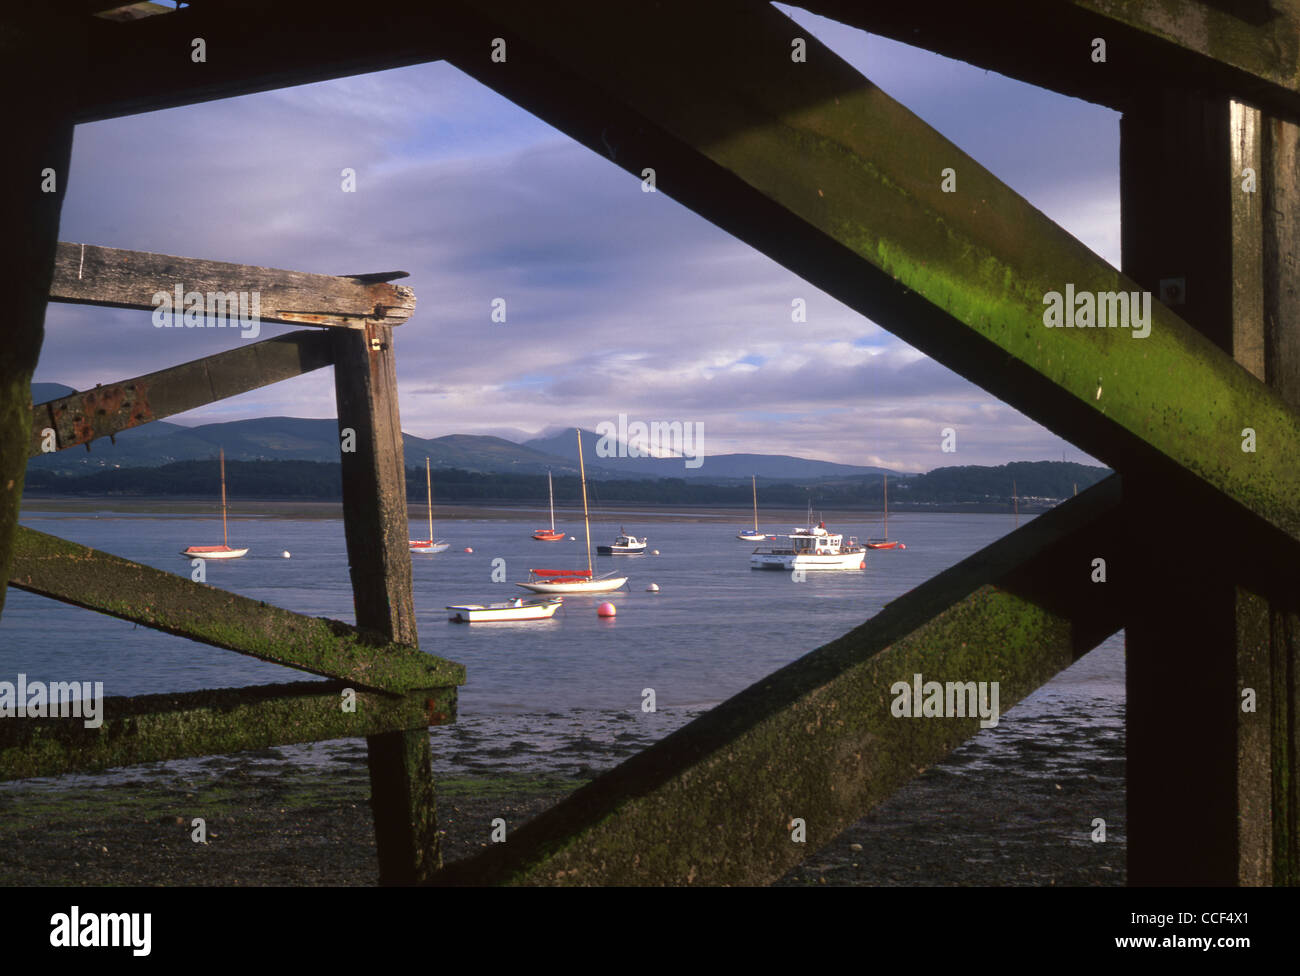 Boats on Menai Strait with Snowdonia in background viewed from beneath Beaumaris Pier Anglesey North Wales UK Stock Photo